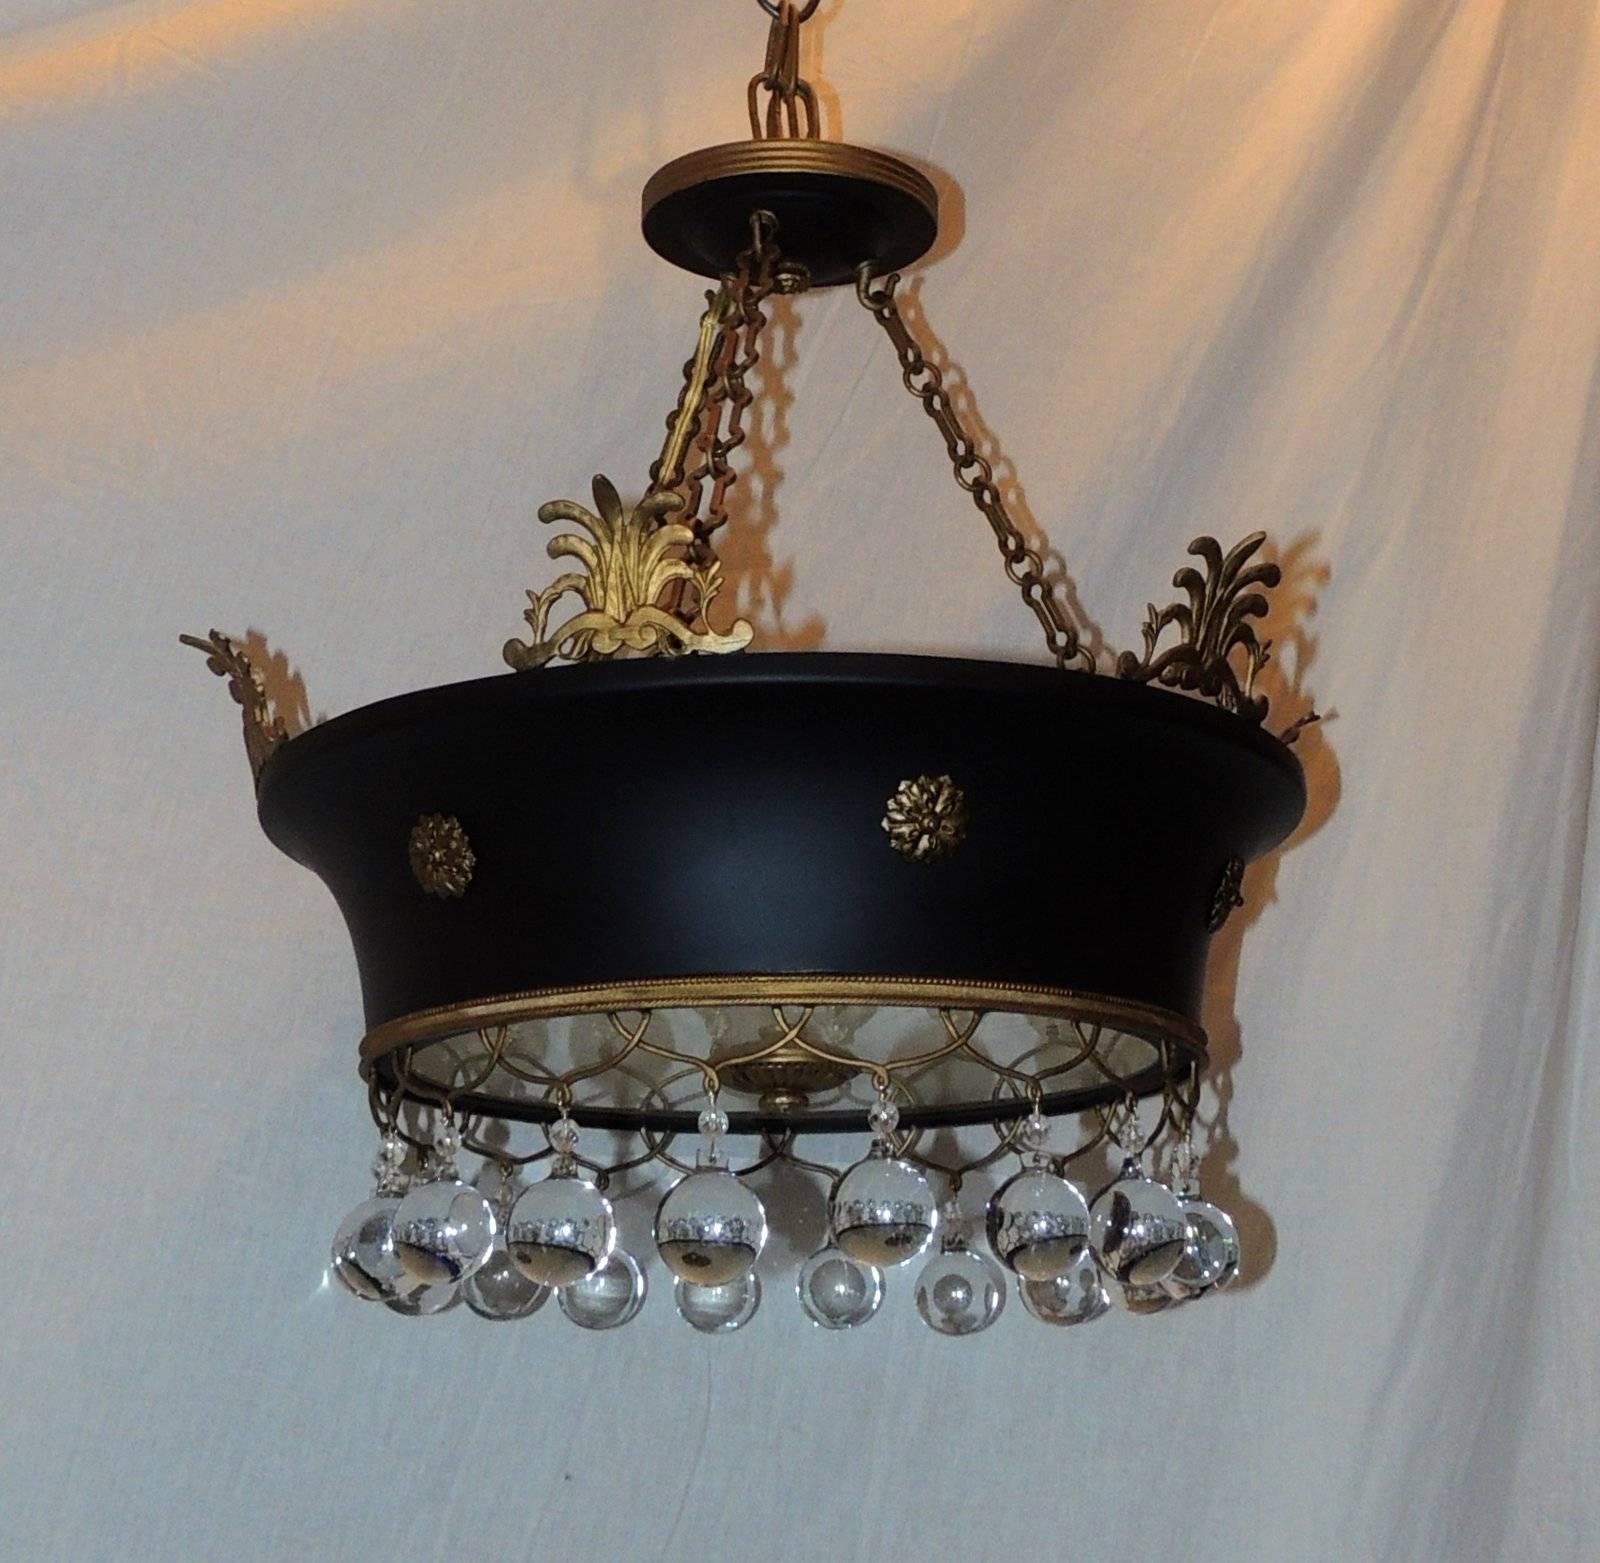 A Wonderful French Empire doré bronze and patina ormolu tole basket fixture with frosted etched glass centre and decorated with crystal ball drops.
Set with four candelabra sockets that can accommodate up to 40 watts each.
Completely redone and